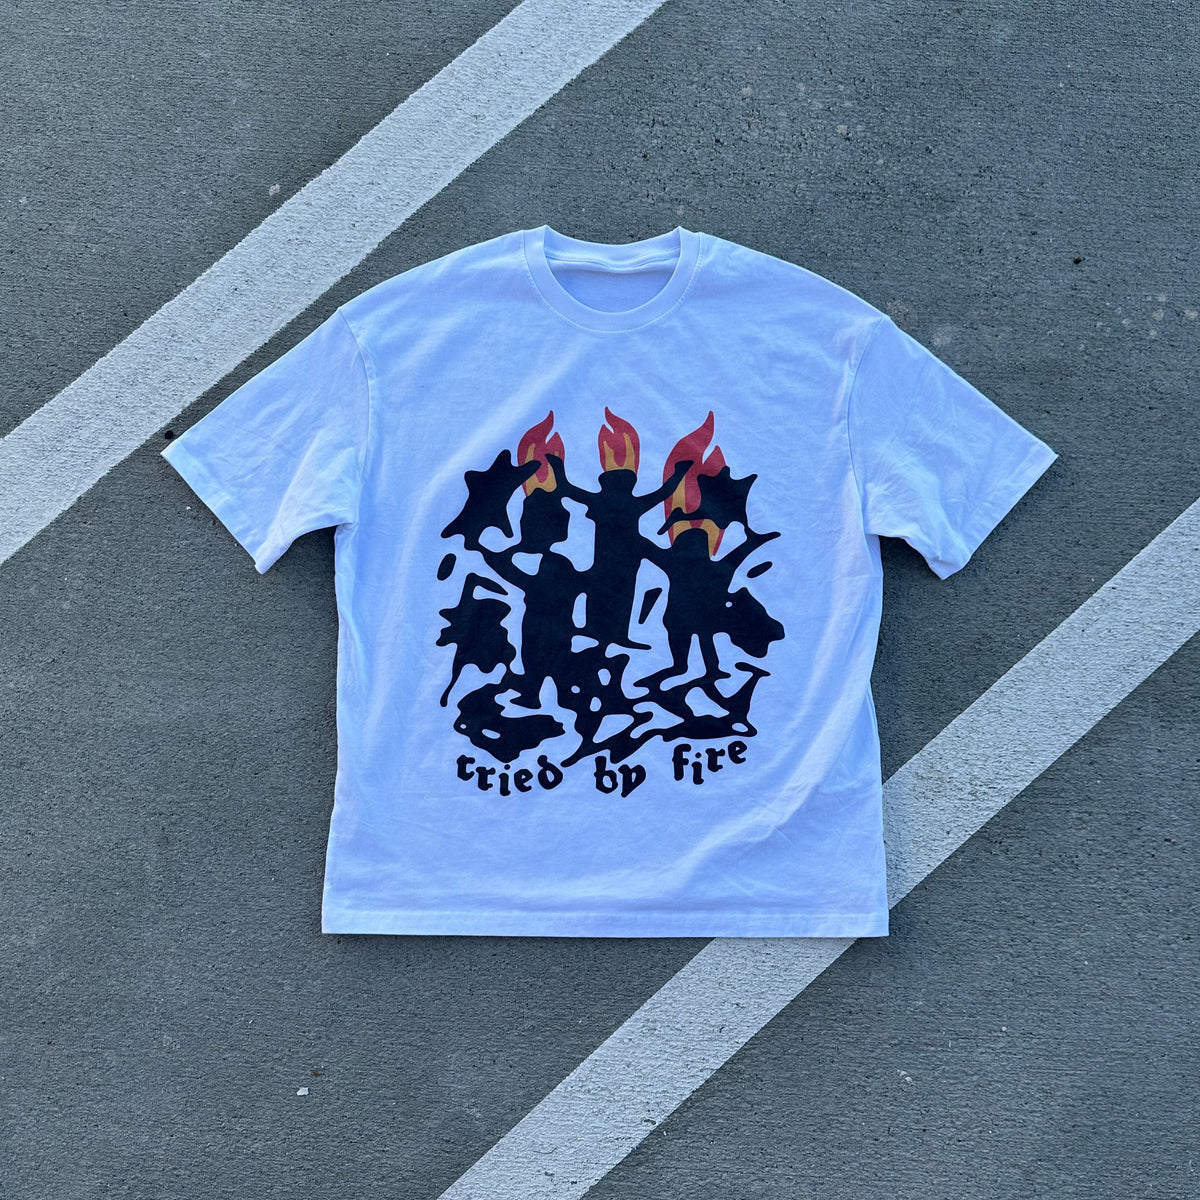 Tried By Fire Tee